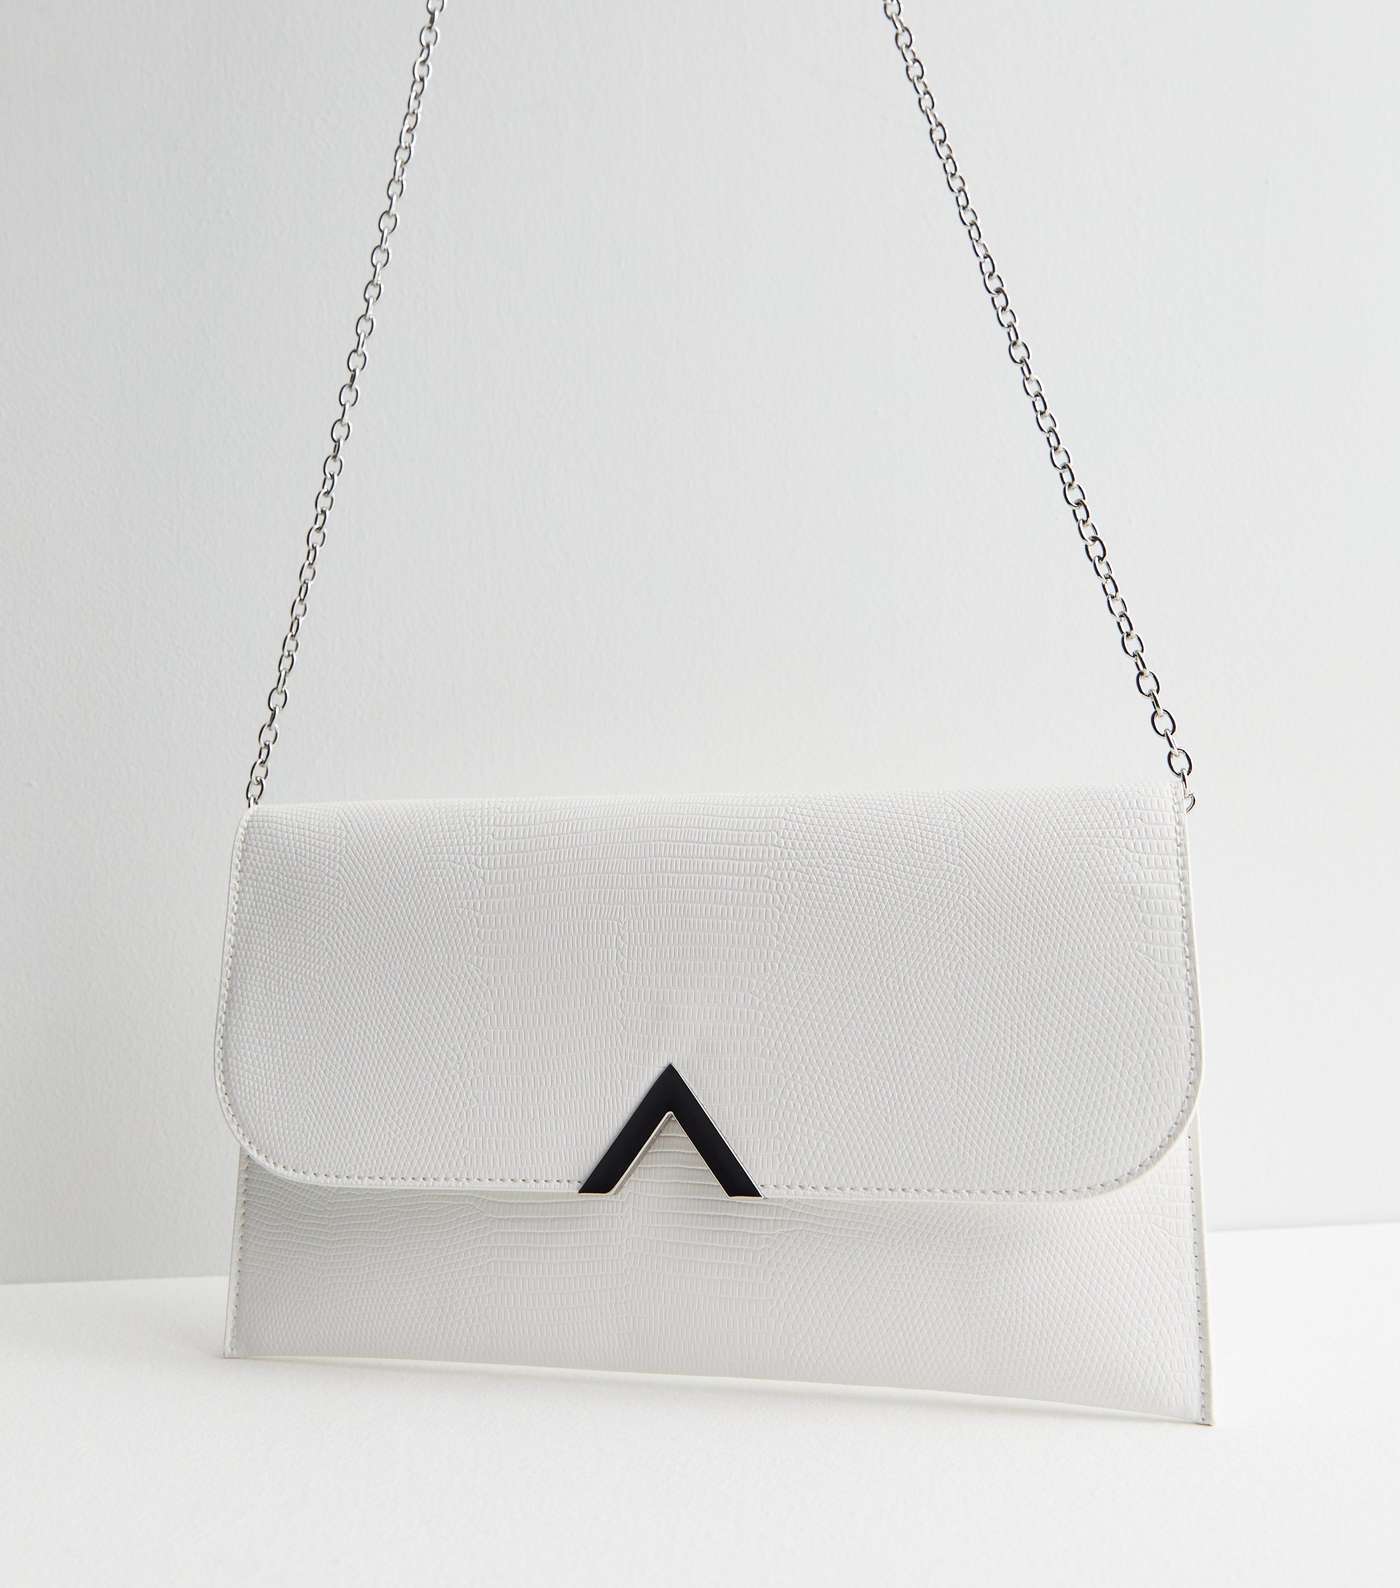 White Leather-Look Chain Strap Clutch Bag Image 3